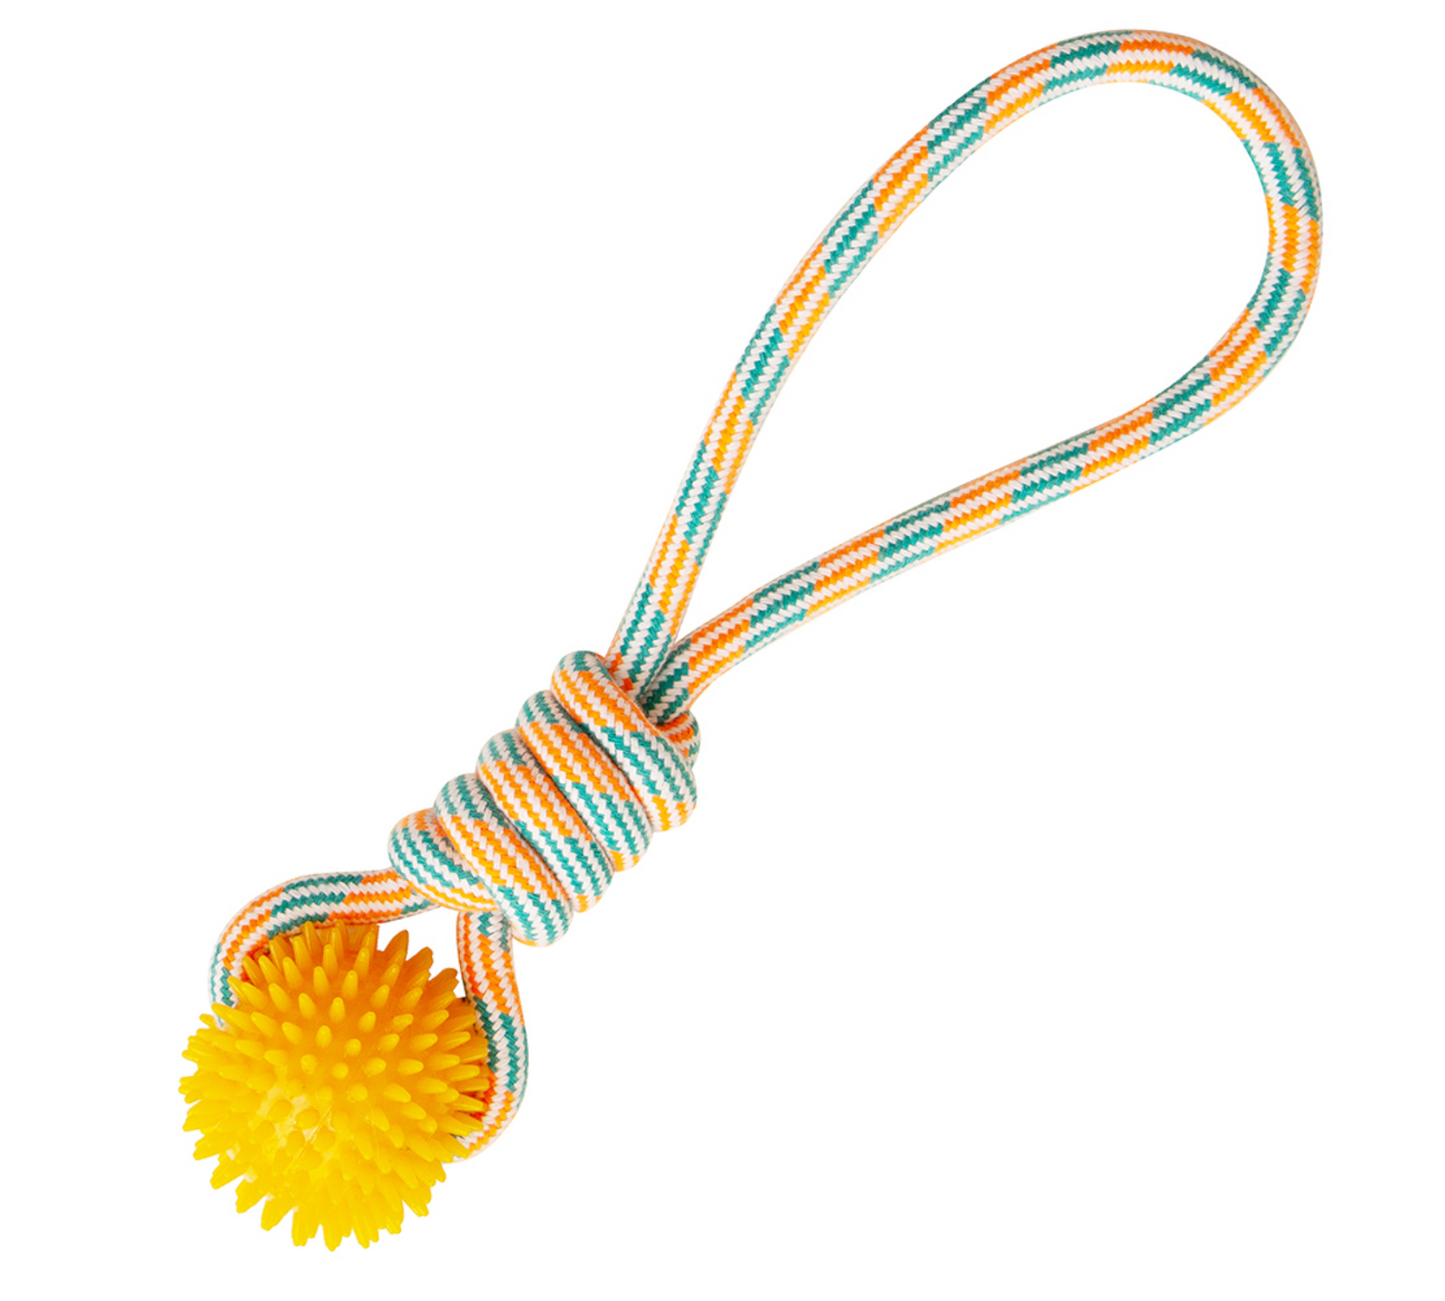 Spike-O-Mite - 16" Rope Toy, Color Varies